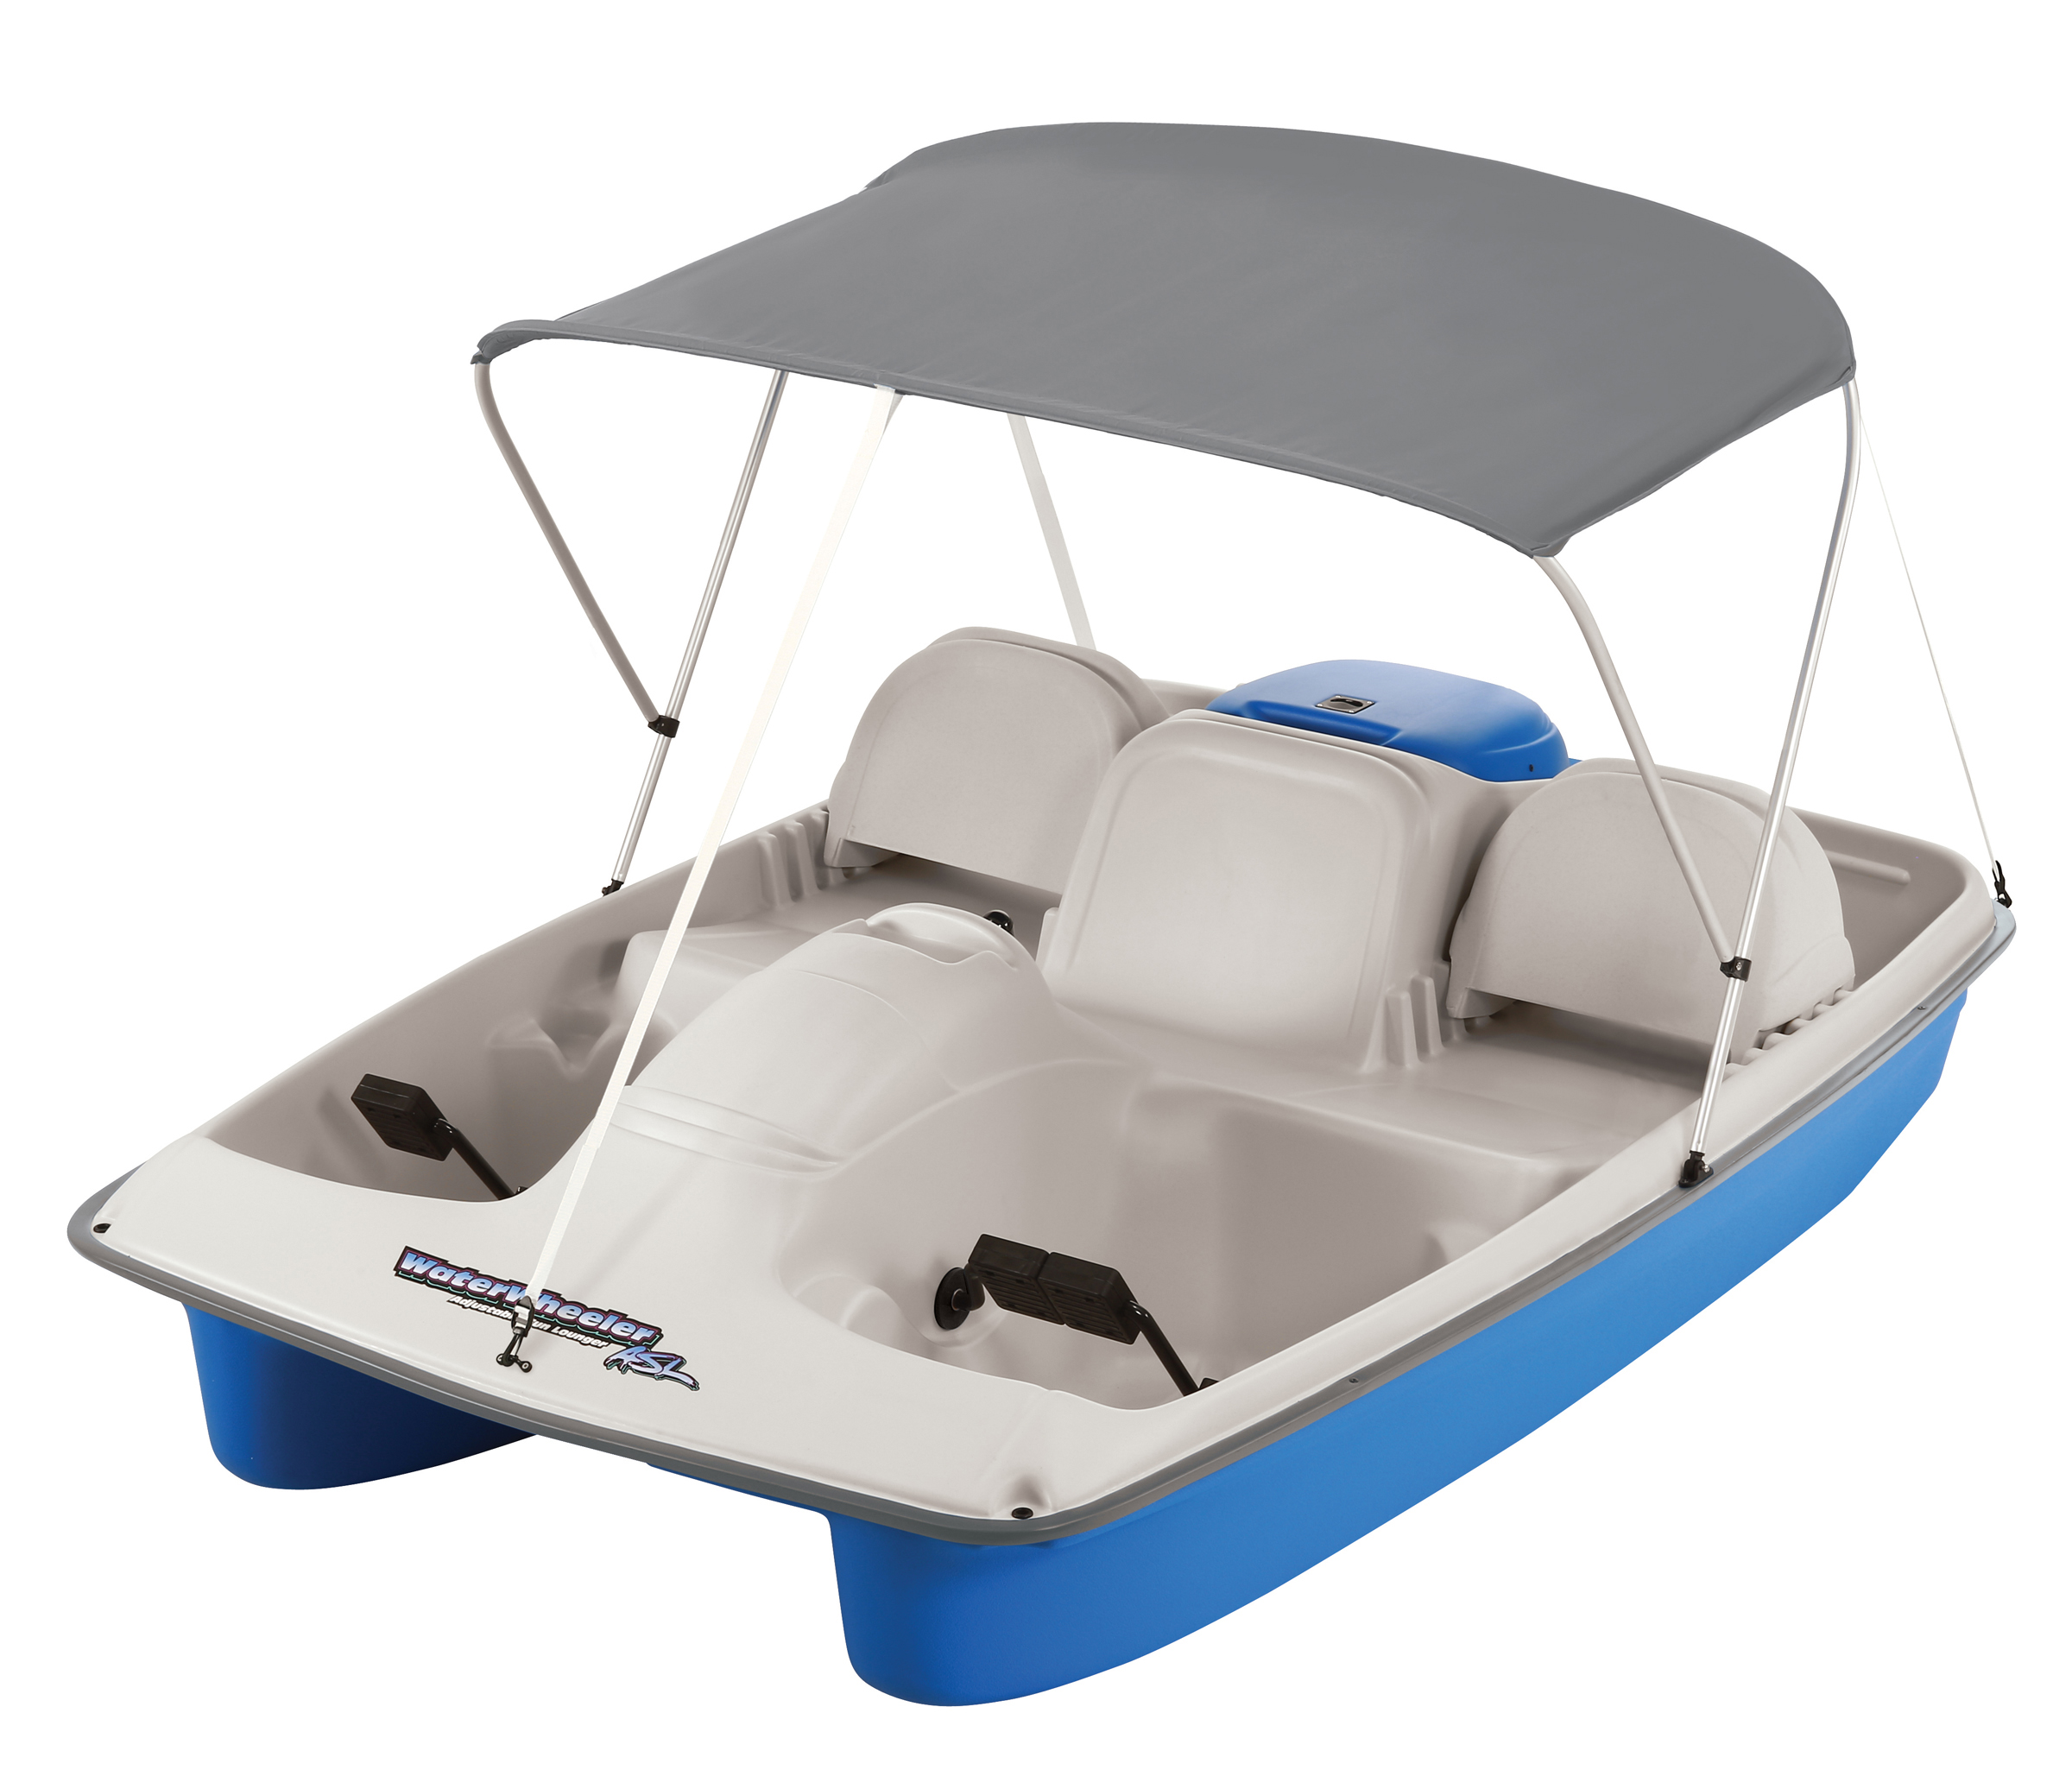 Water Wheeler ASL Electric Pedal Boat with Canopy